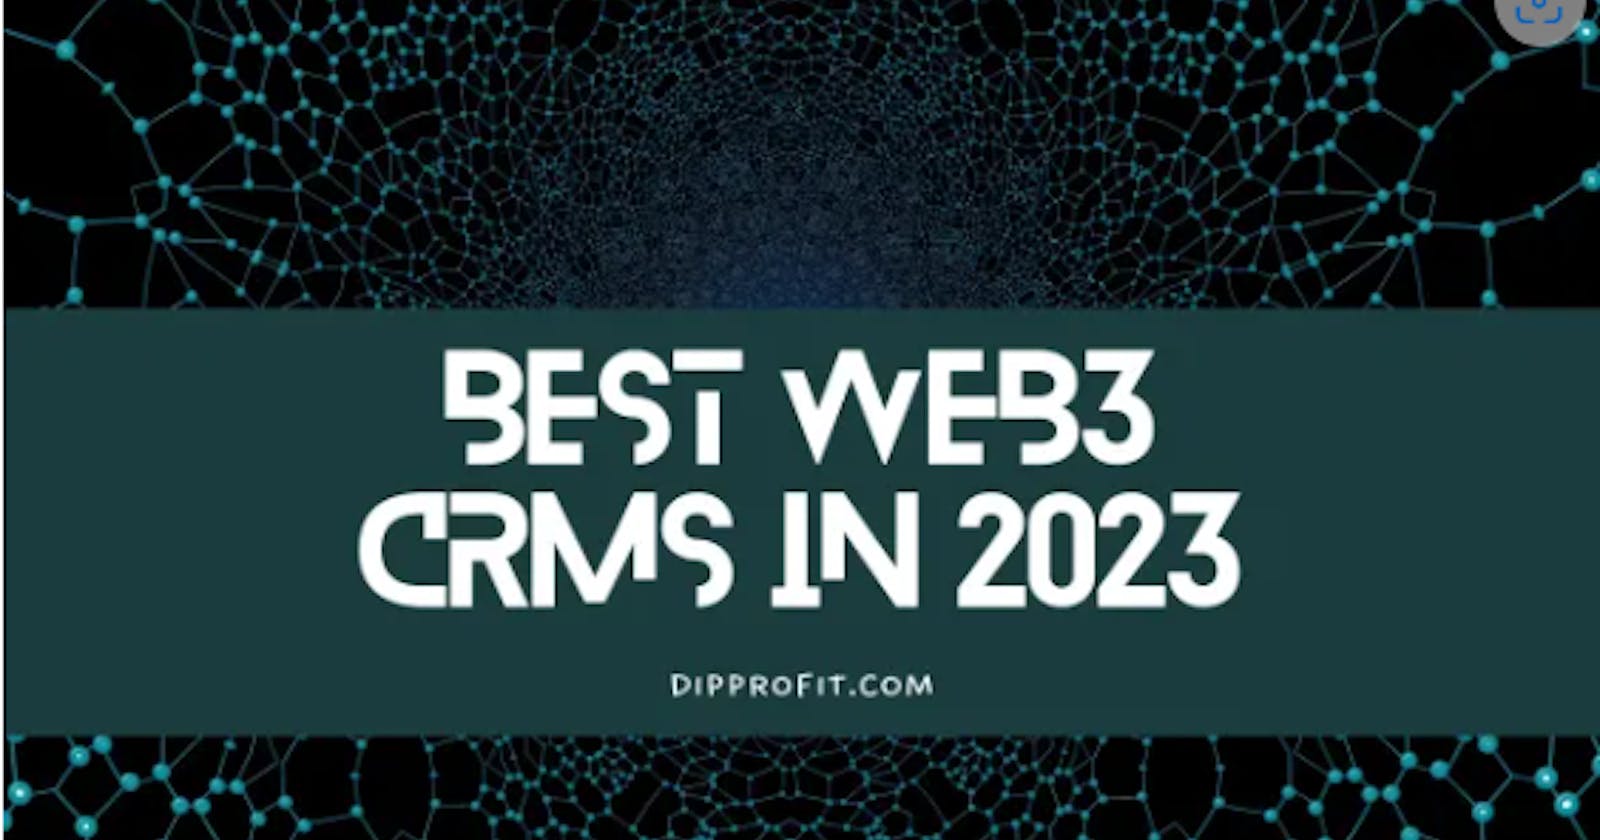 The Best Web3 CRM in 2023